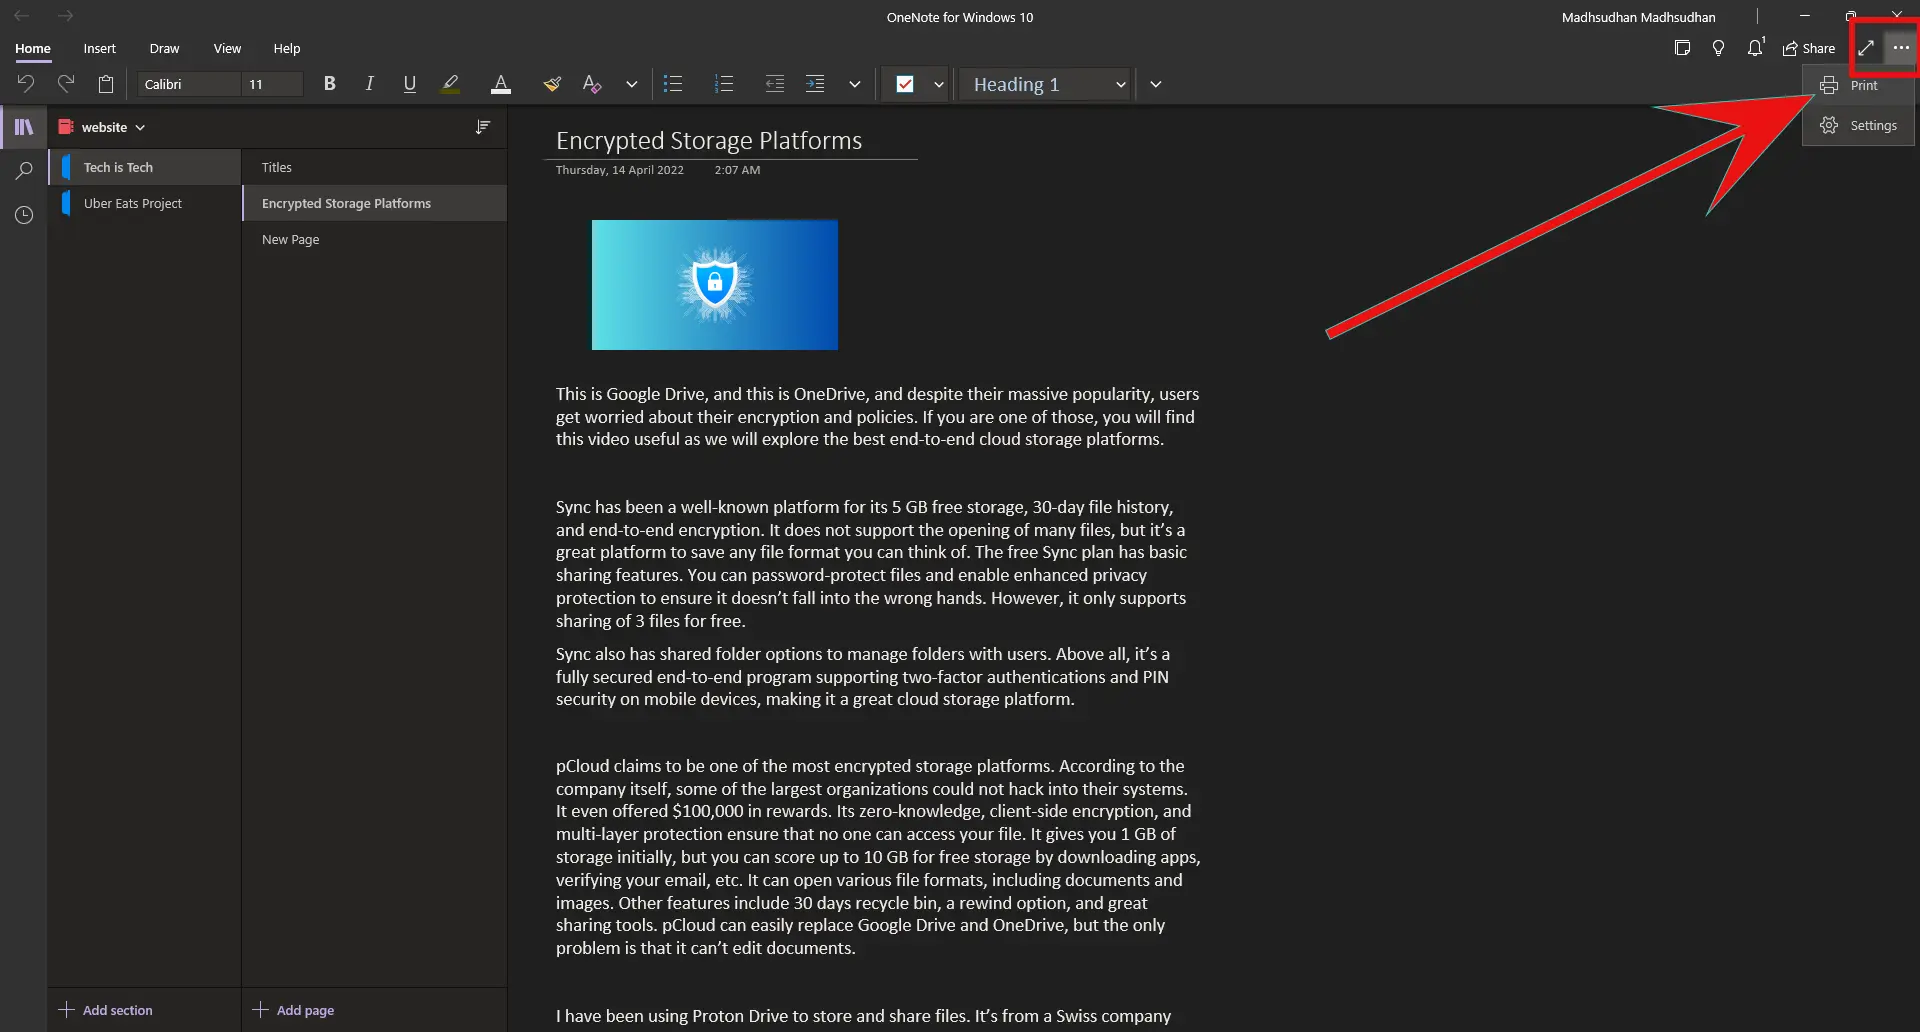 Print in OneNote for Windows 10